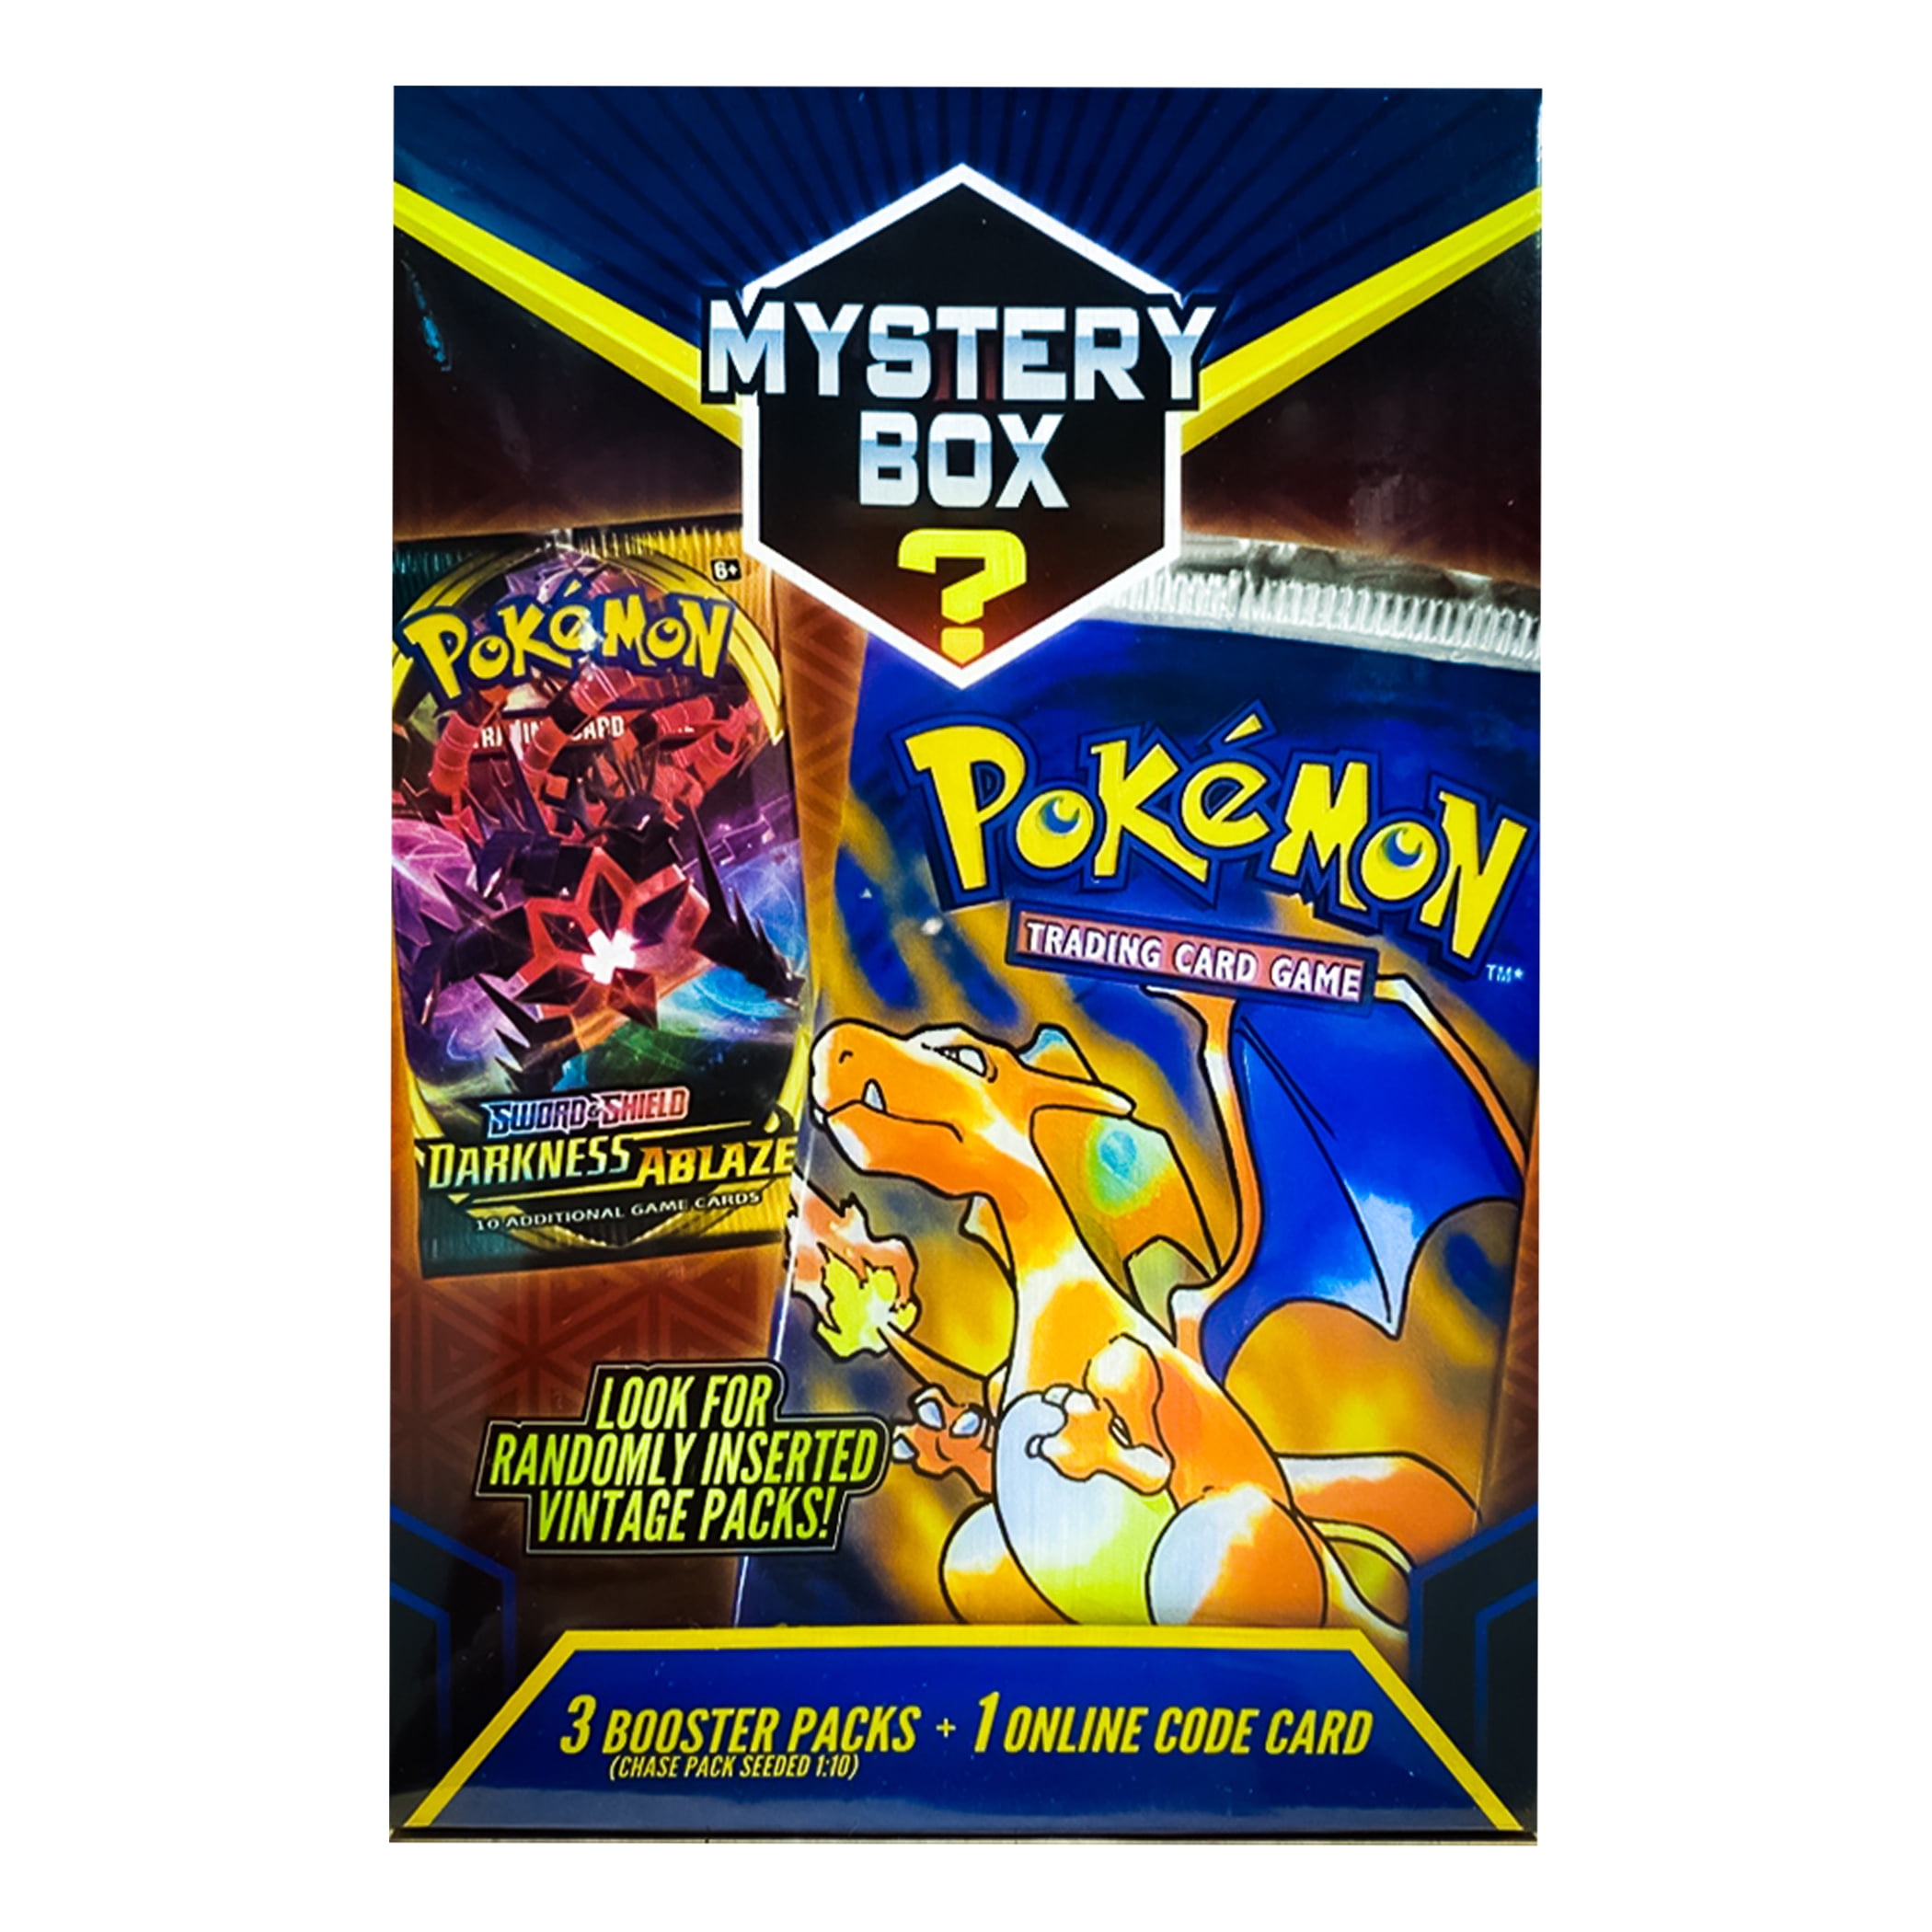 CARDS 3 FOIL HOLOS CHARIZARD WALMART EXCL POKEMON MYSTERY POWER CUBE SEALED 60 